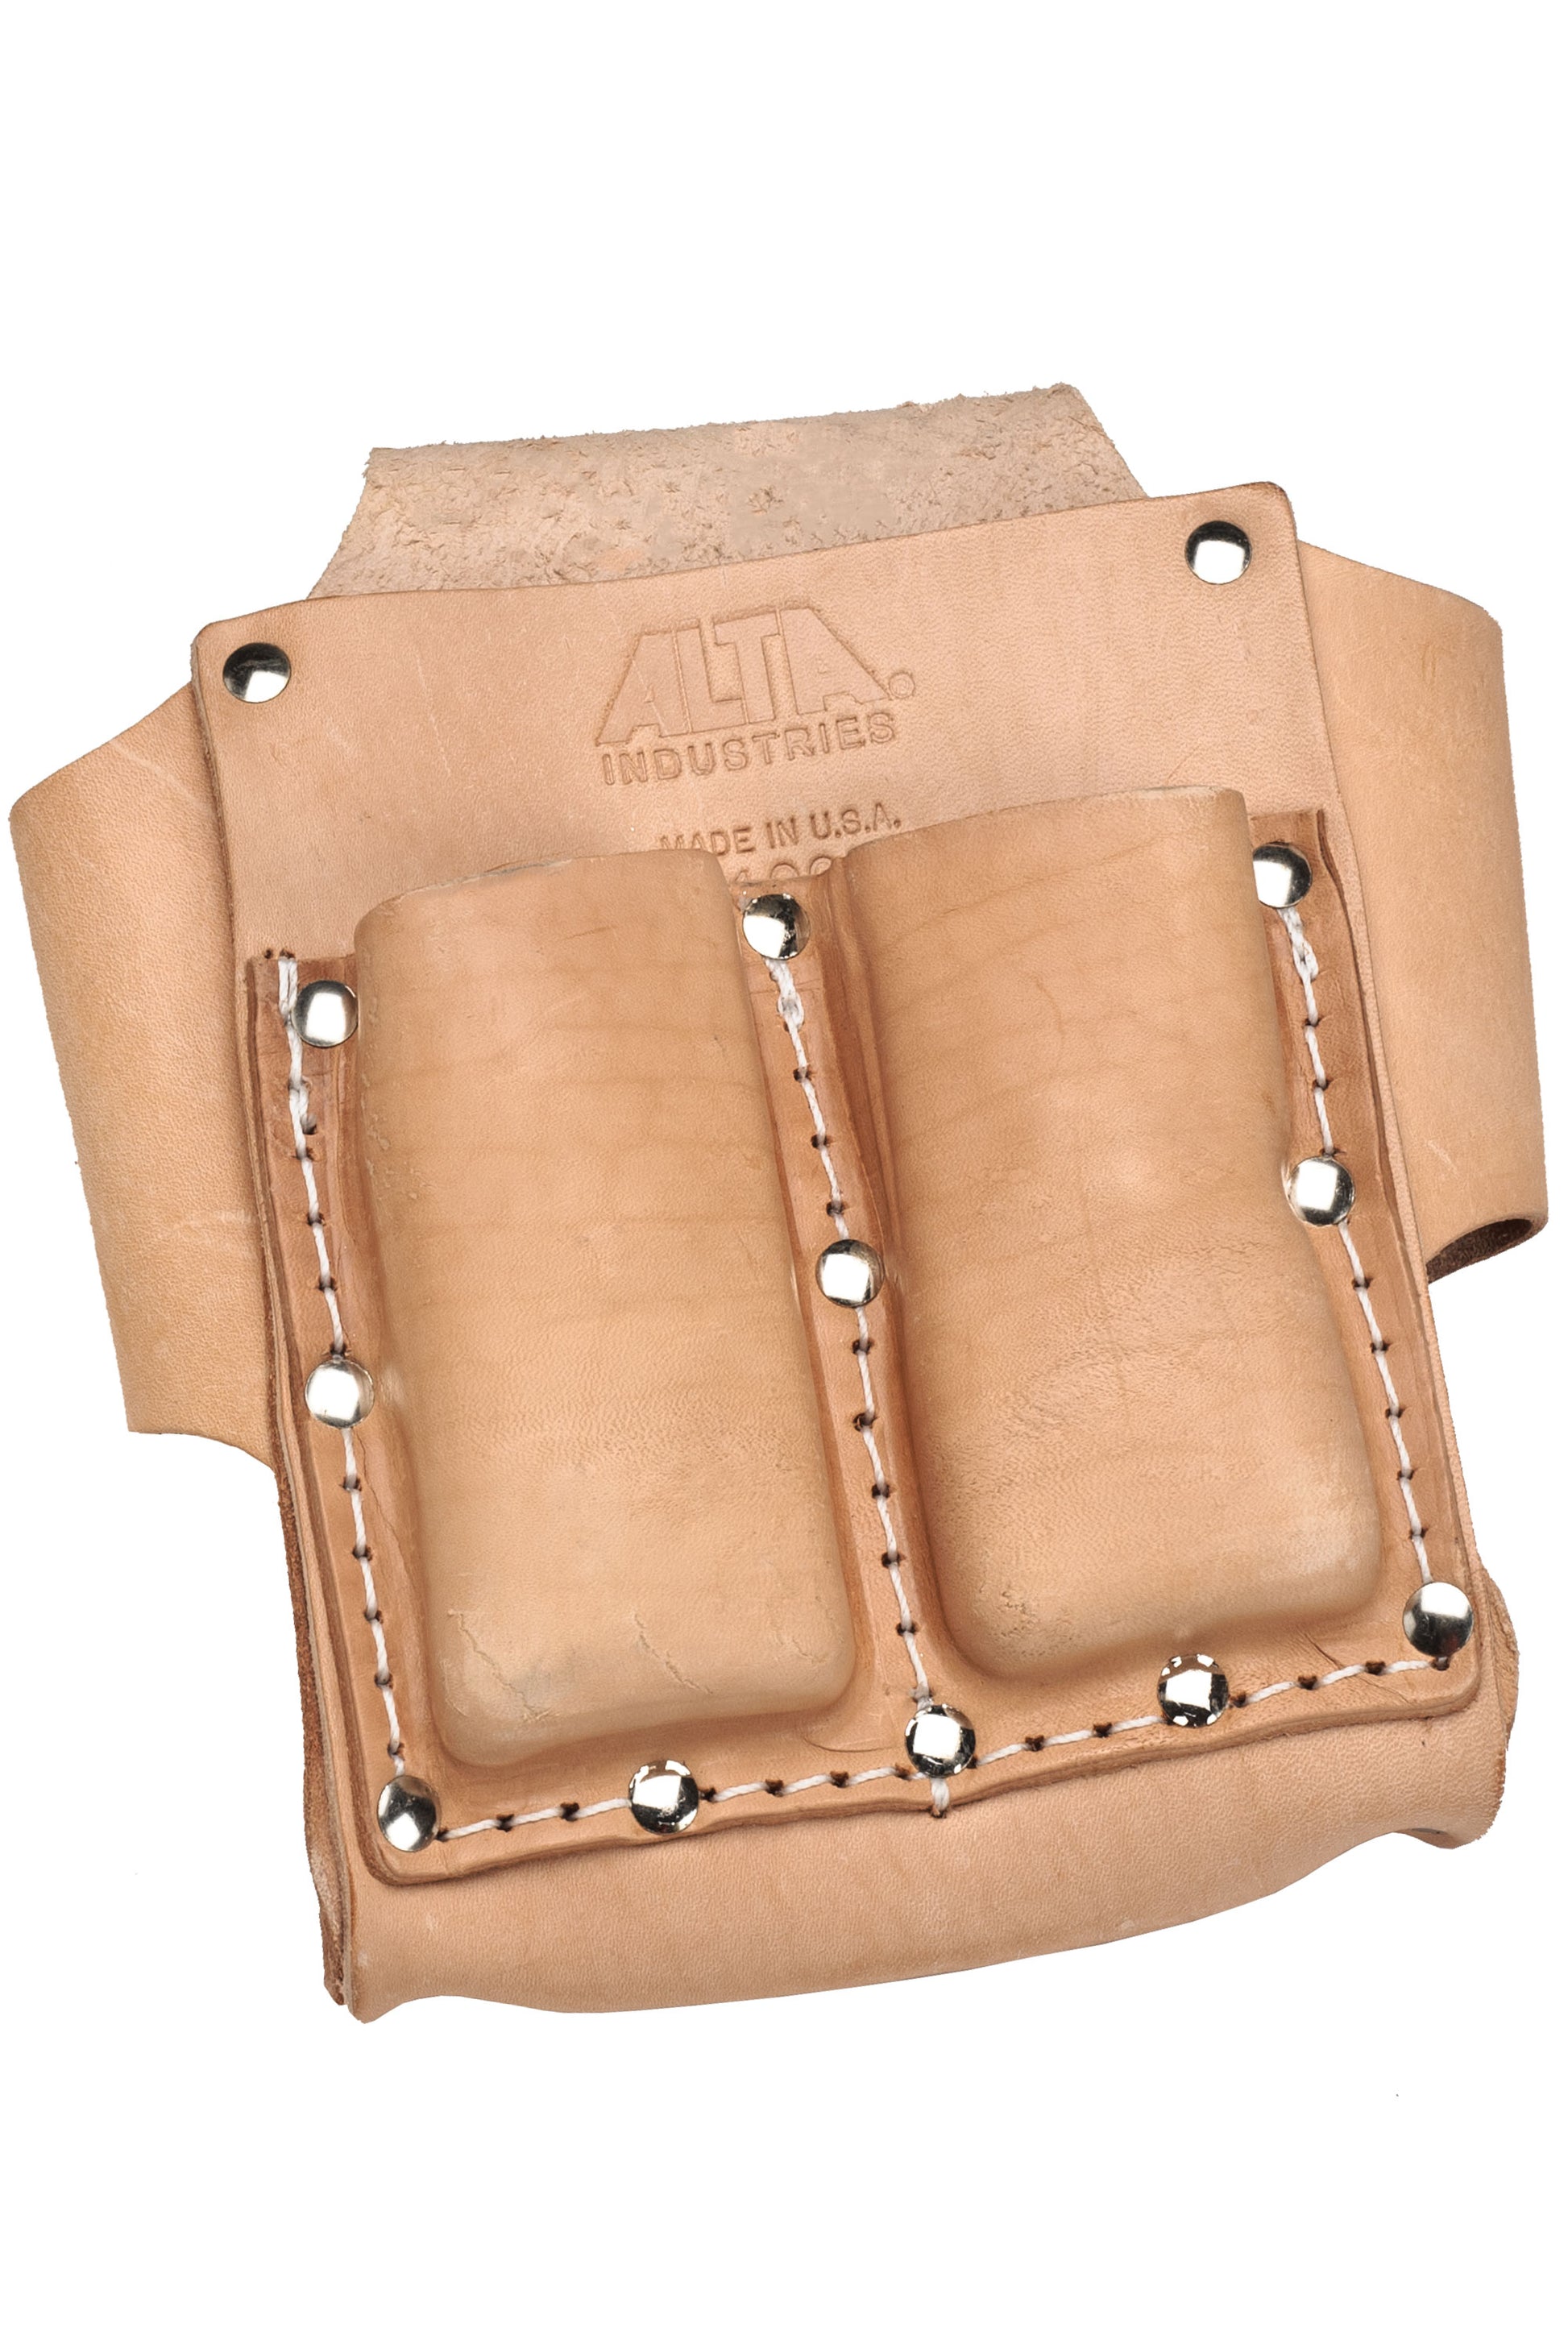 AltaGEAR Genuine Leather Box Style Tool Pouch